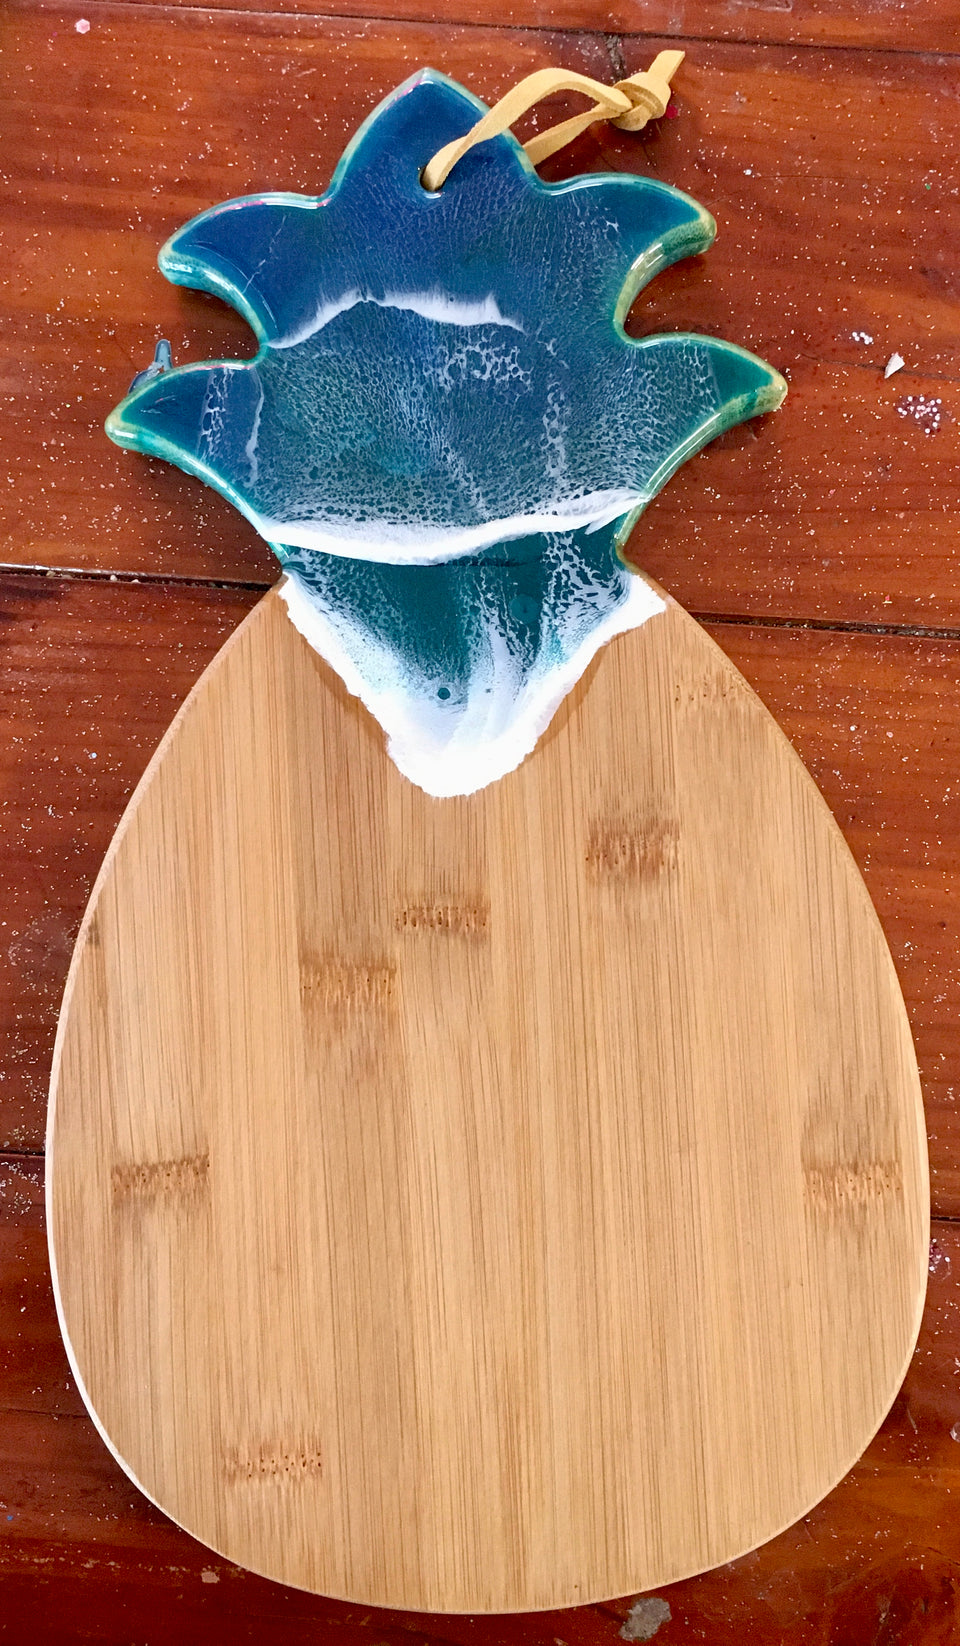 wooden cutting board in the shape of a pineapple with ocean wave resin at the top.